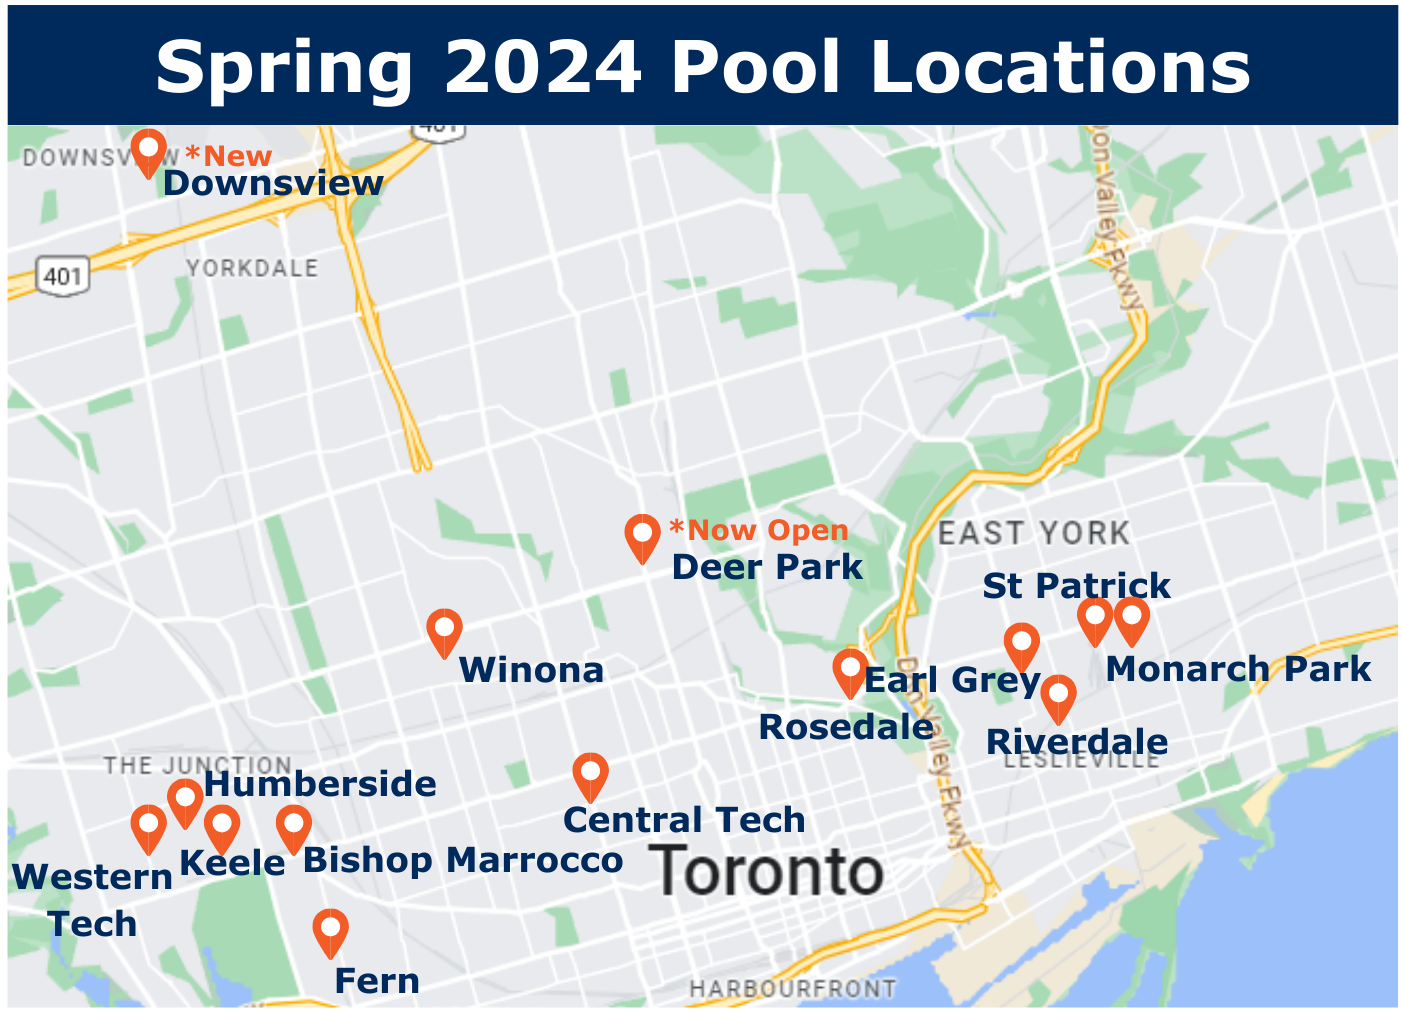 Spring 2024 Swimming Lesson Pool Locations Map for Toronto